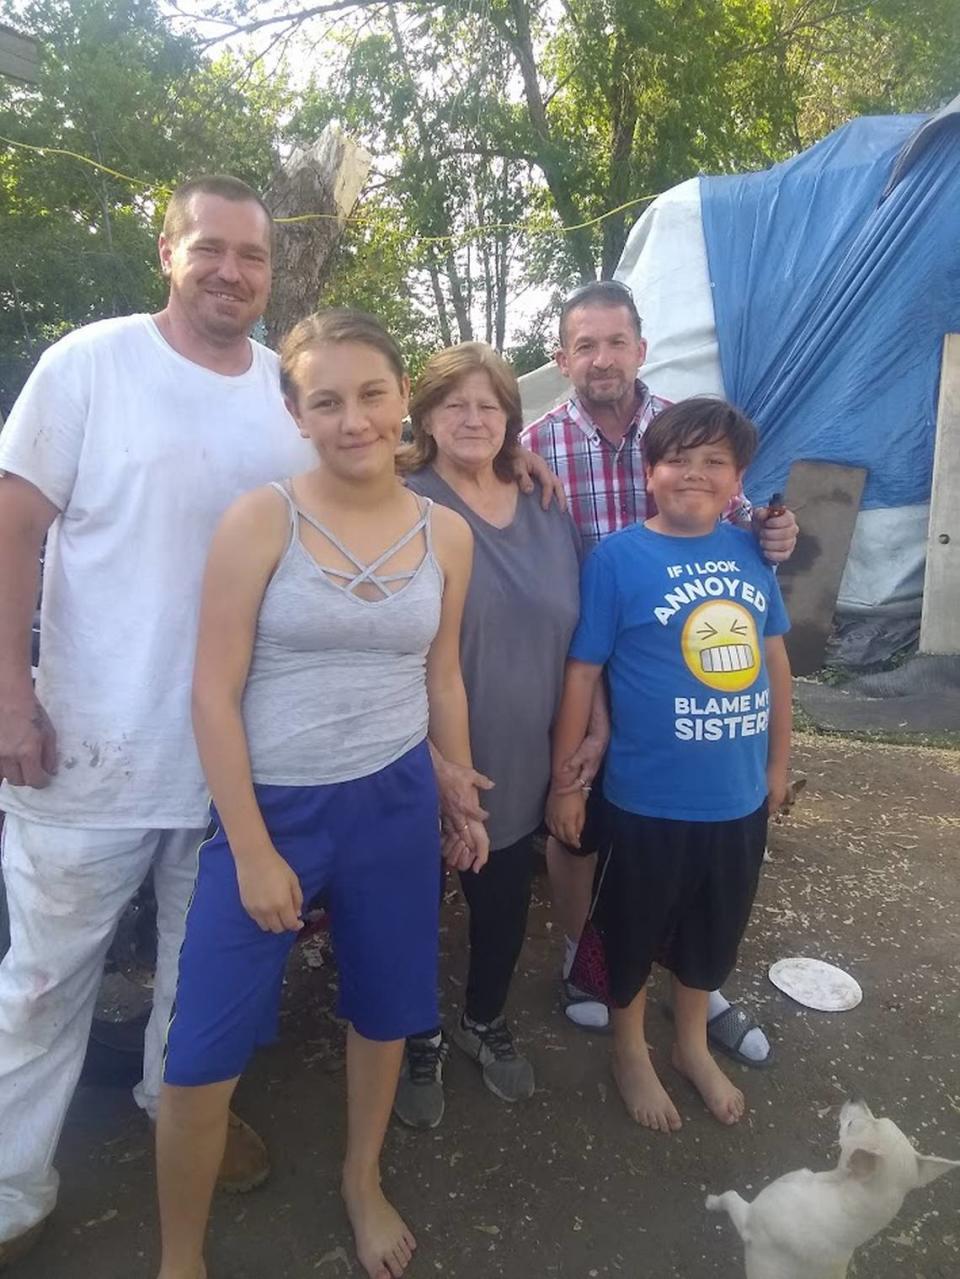 Angelica Santos, pictured here with her family, was a sixth-grade student when she told friends that she was dating a Yakima police officer in 2019.